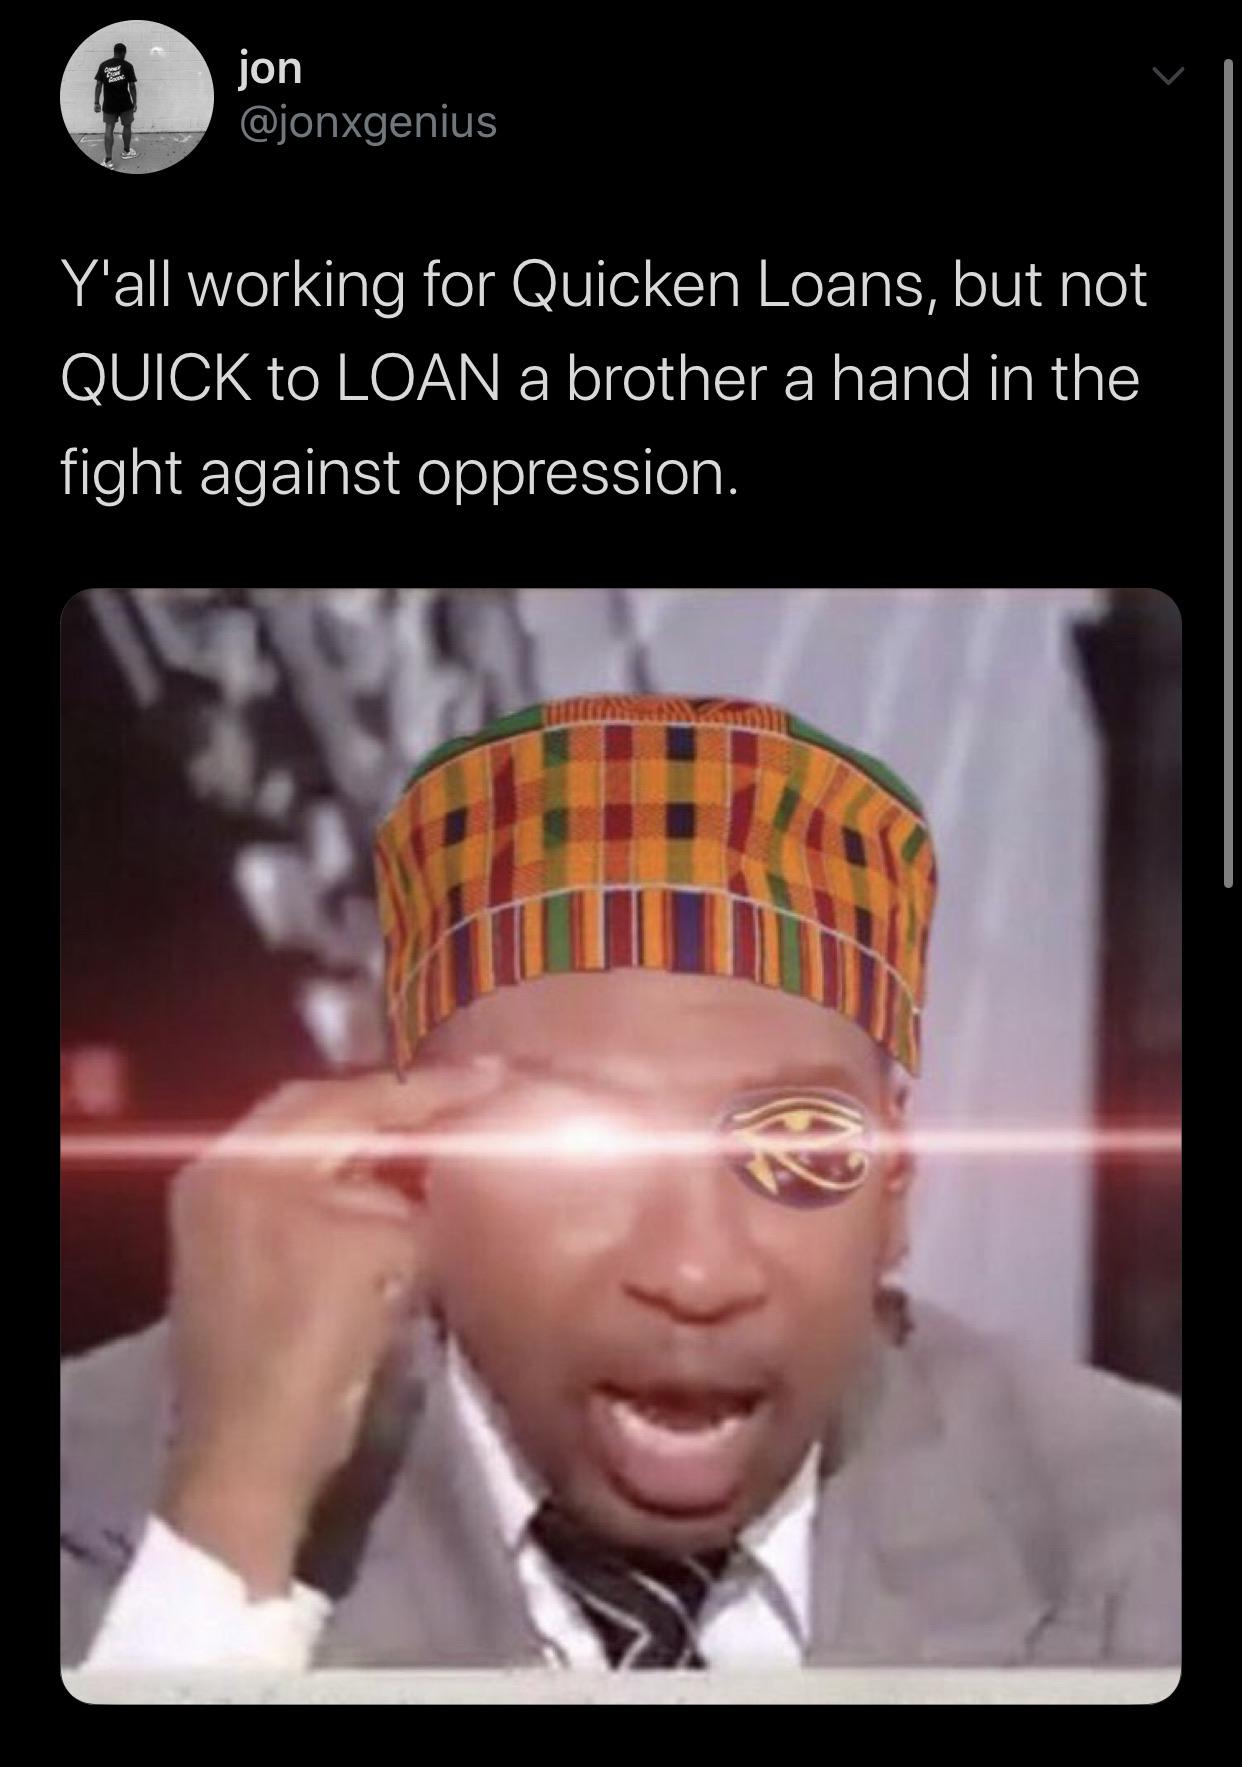 photo caption - jon Y'all working for Quicken Loans, but not Quick to Loan a brother a hand in the fight against oppression.